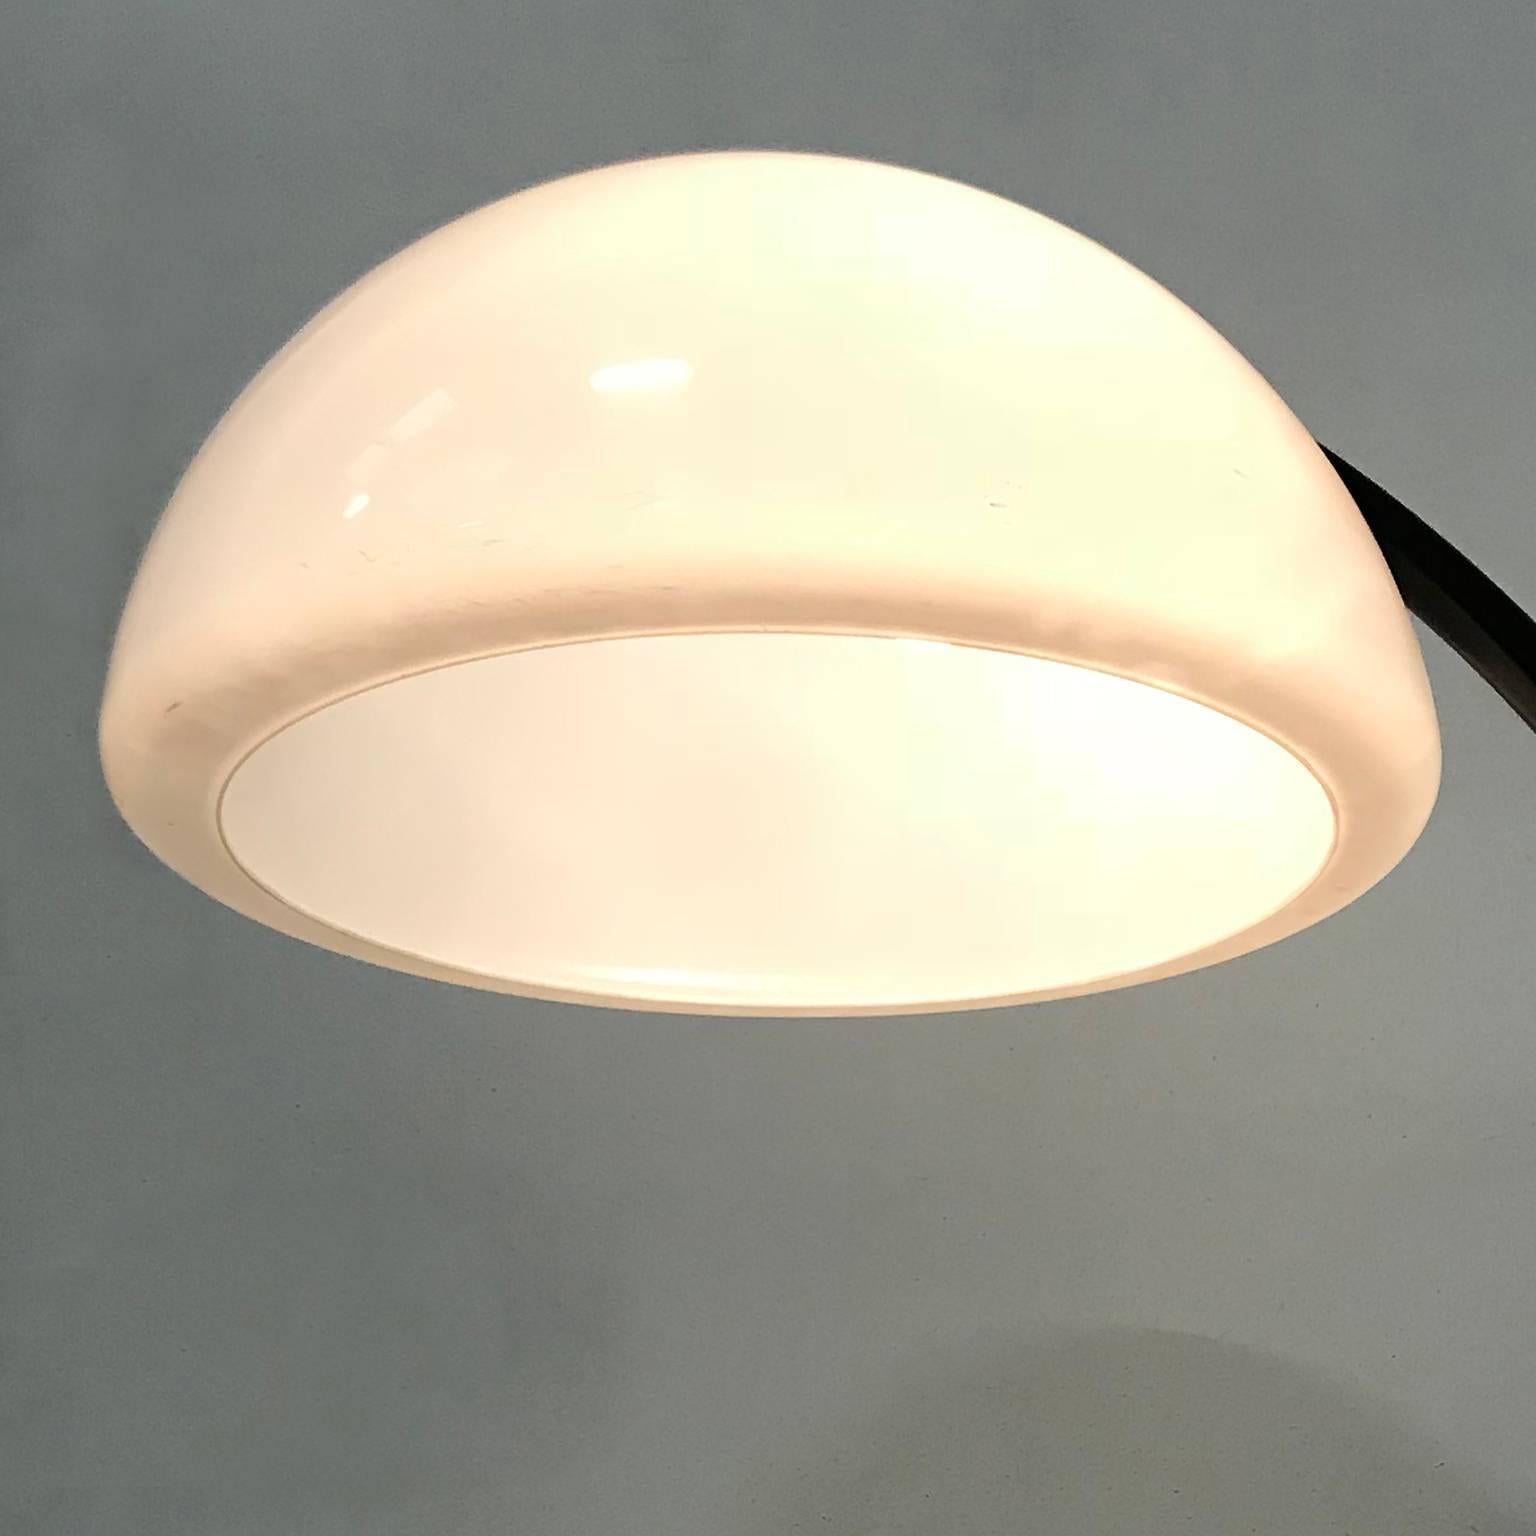 1965, Elio Martinelli for Martinelli Luce, Black Based Floor Lamp Plastic Shade For Sale 4